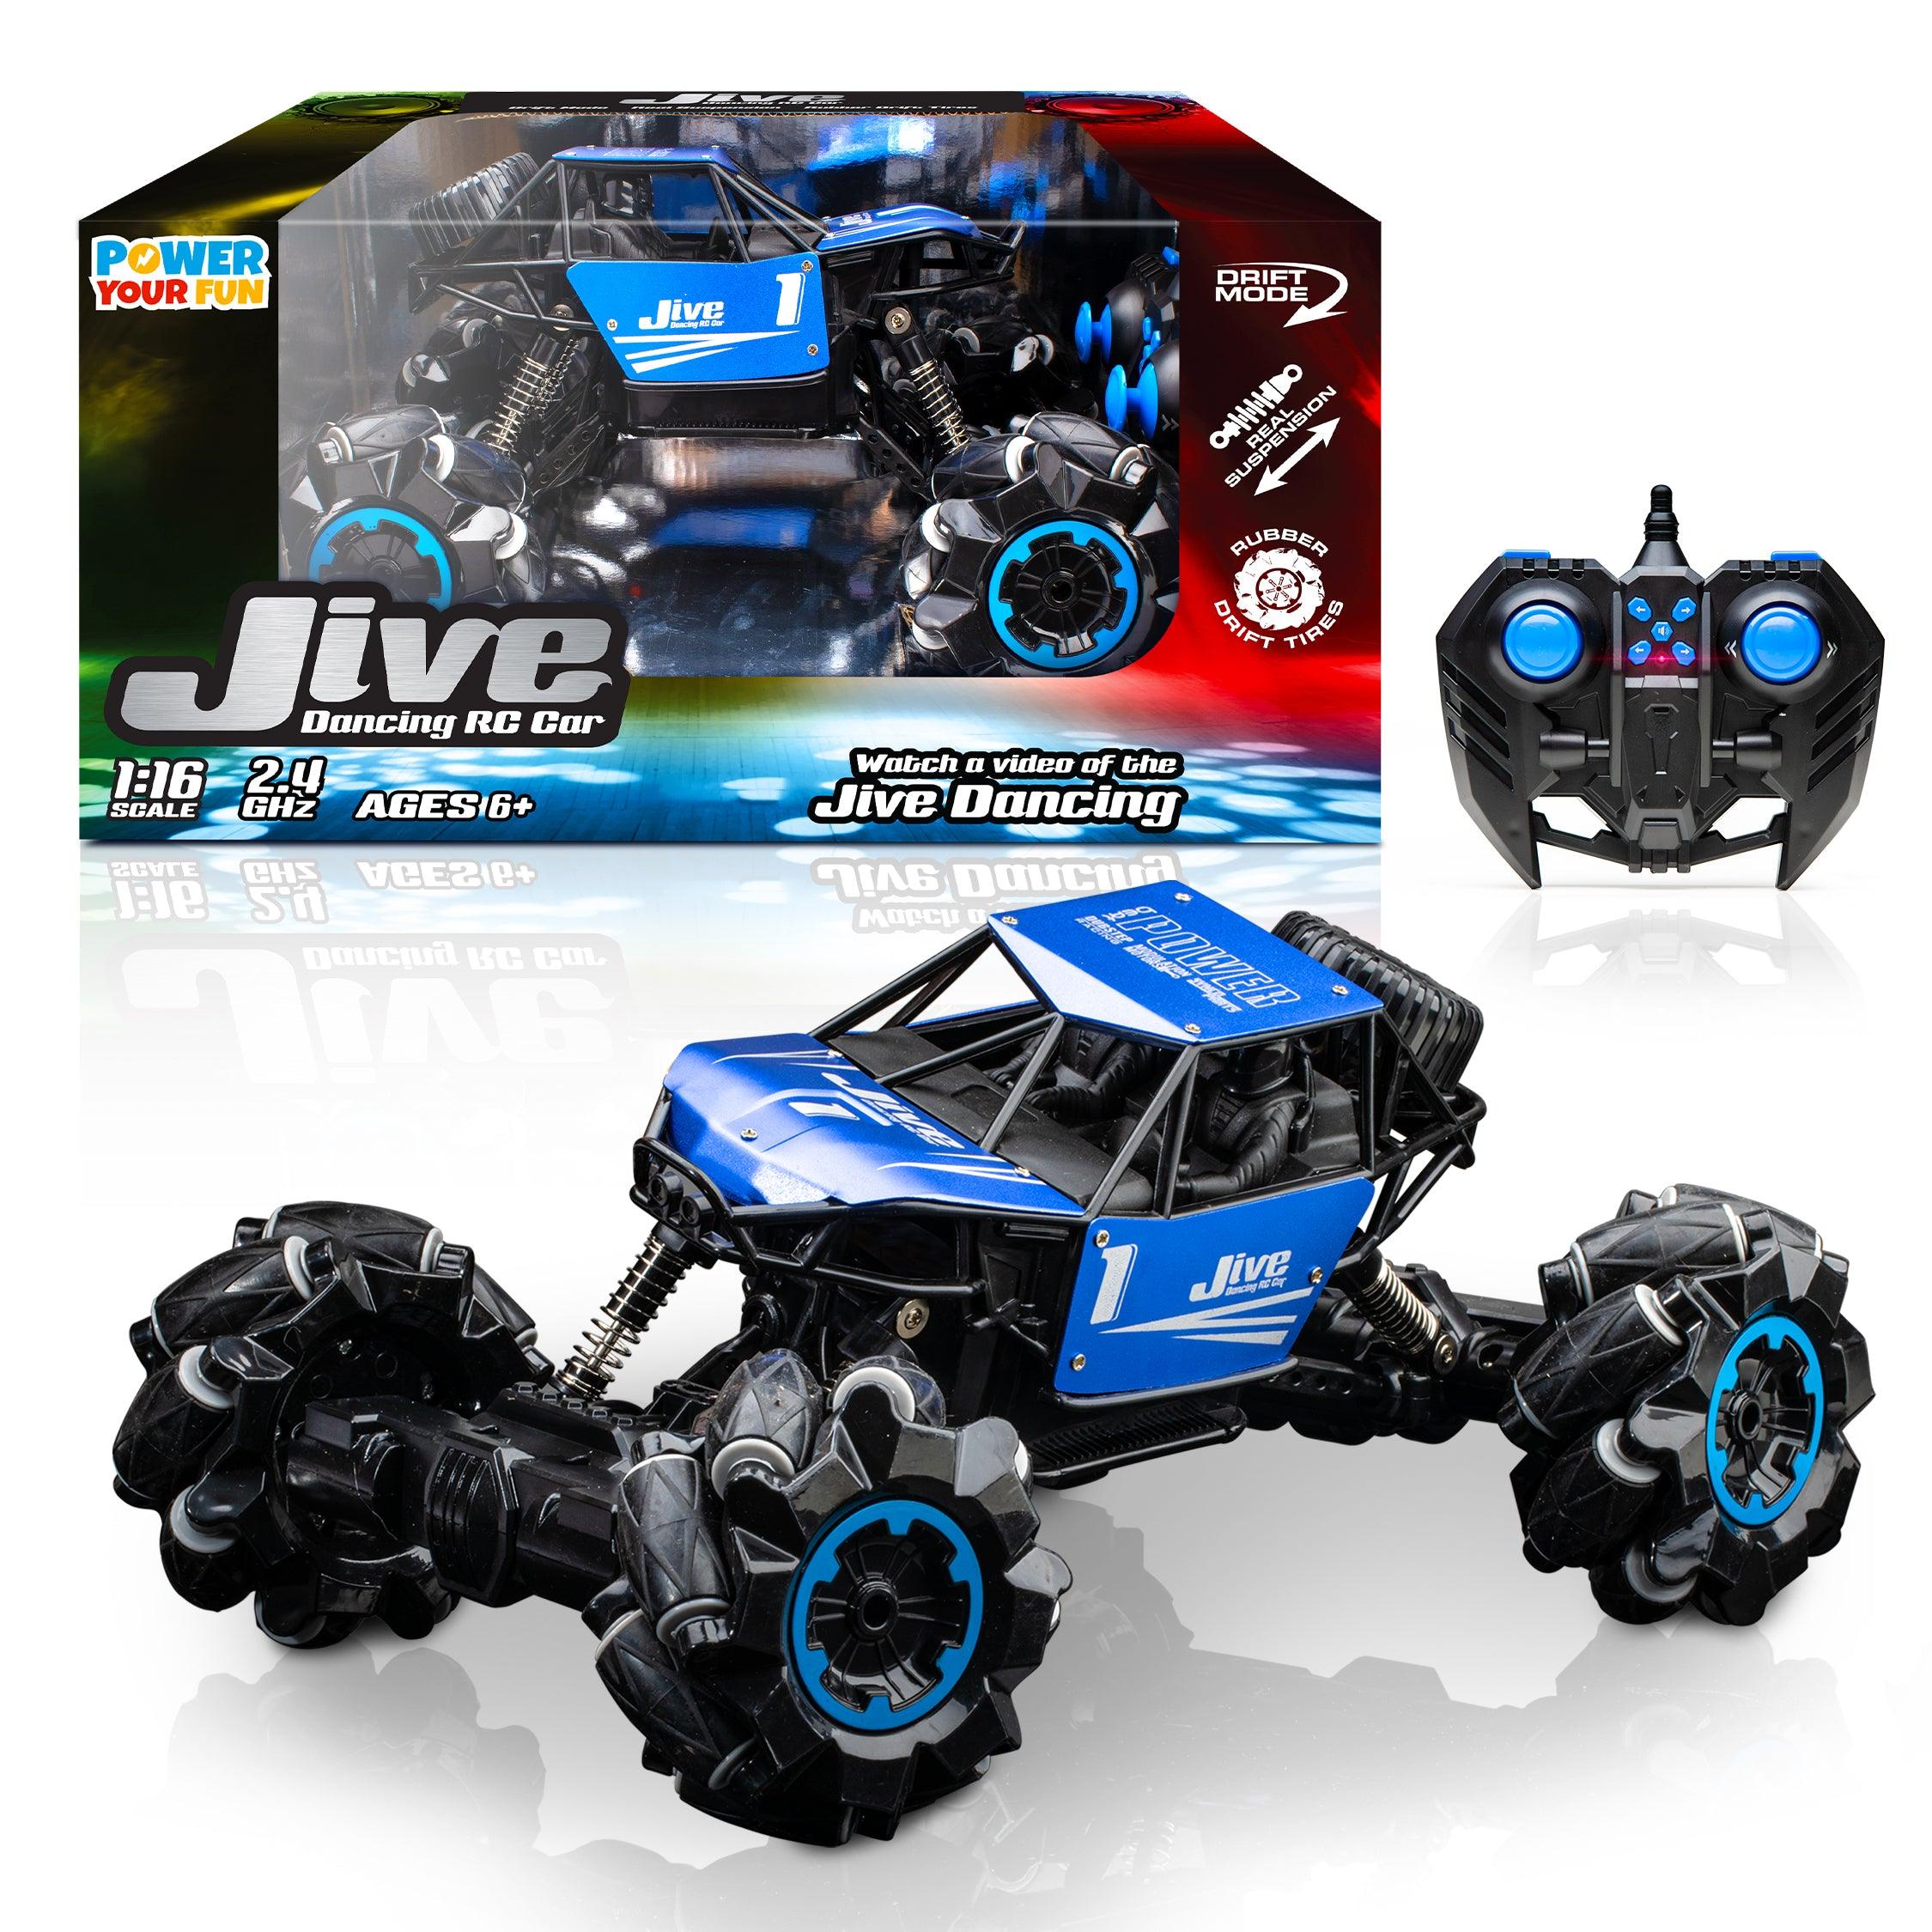 Jive Dancing Remote Control Car with Music and LED Lights (Blue/Red) - poweryourfun